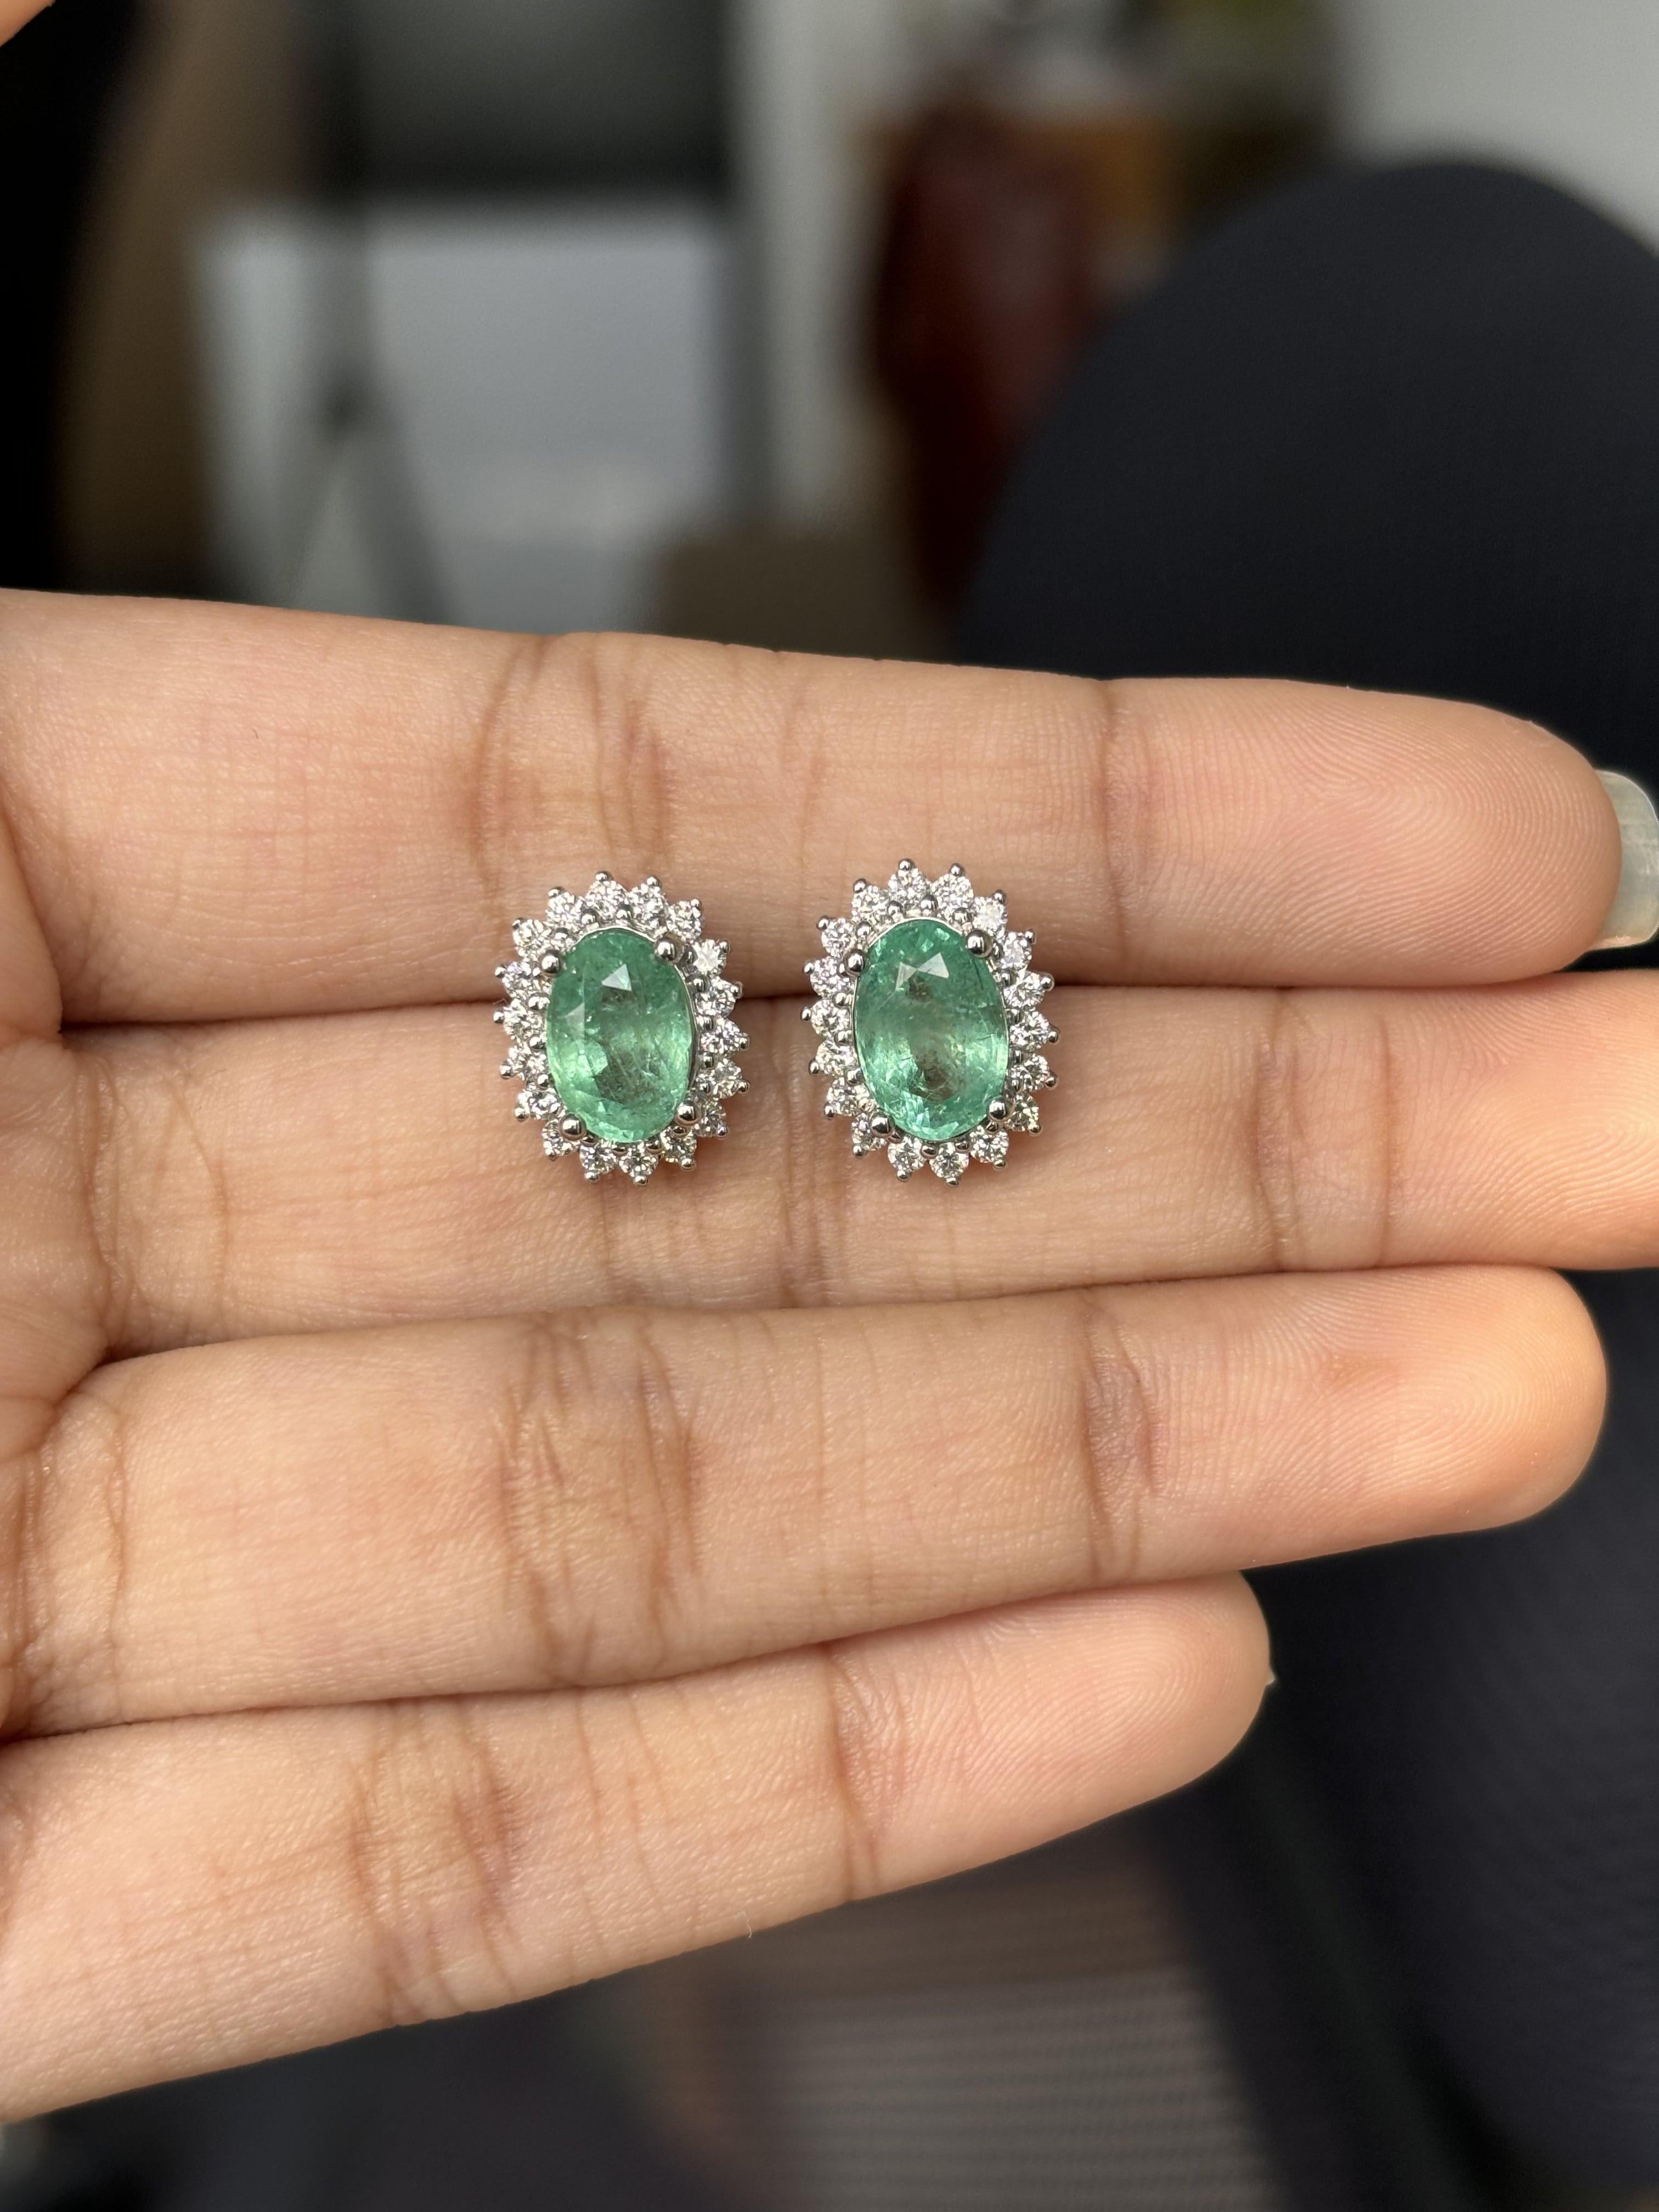  2.96 Carat Emerald Stud Earrings with Natural Diamonds in 18K White Gold  For Sale 5